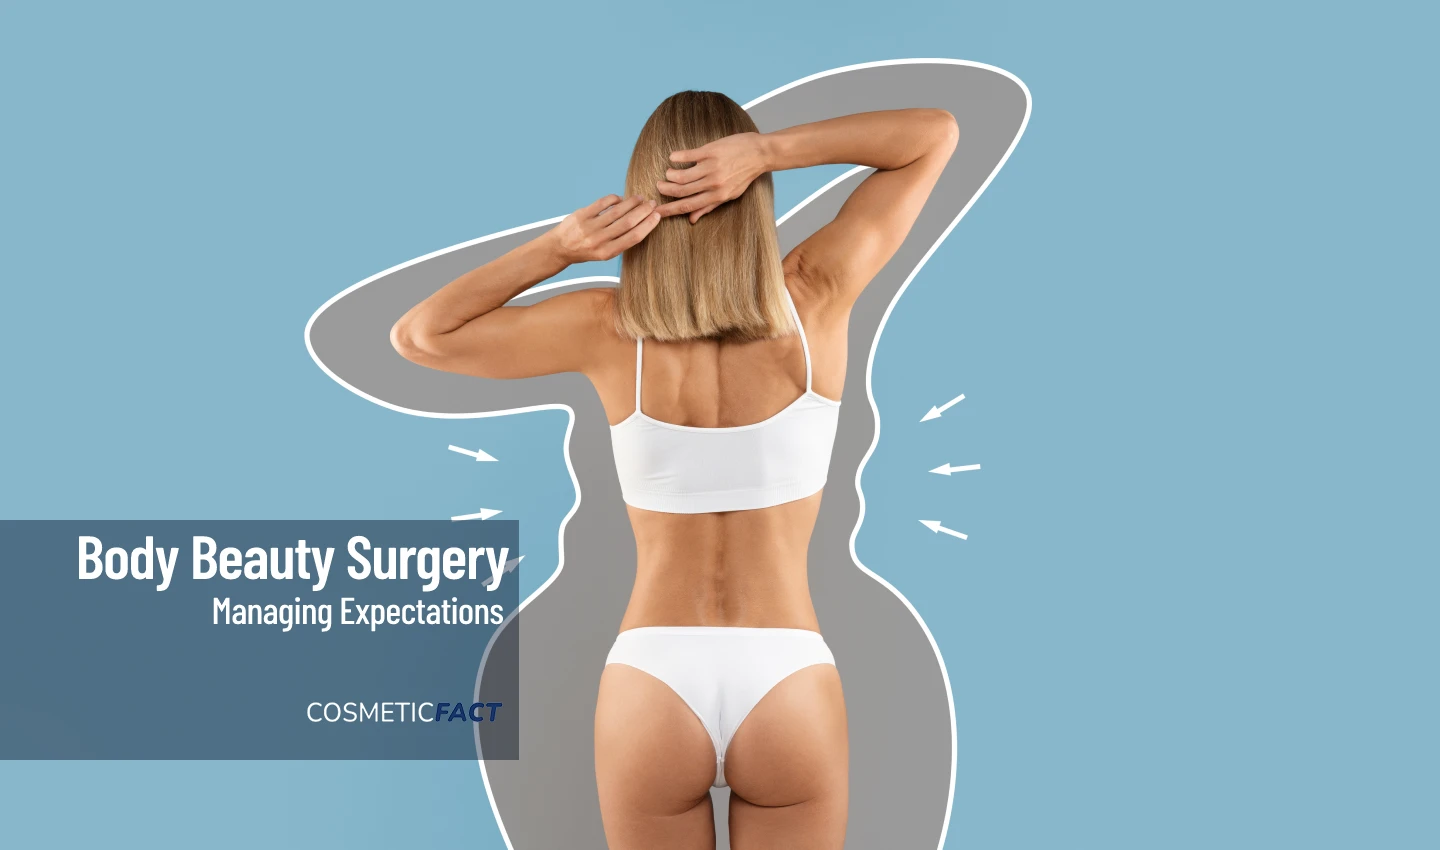 A woman visualizing her new body shape after body beauty surgery, emphasizing the importance of setting realistic expectations and managing recovery.